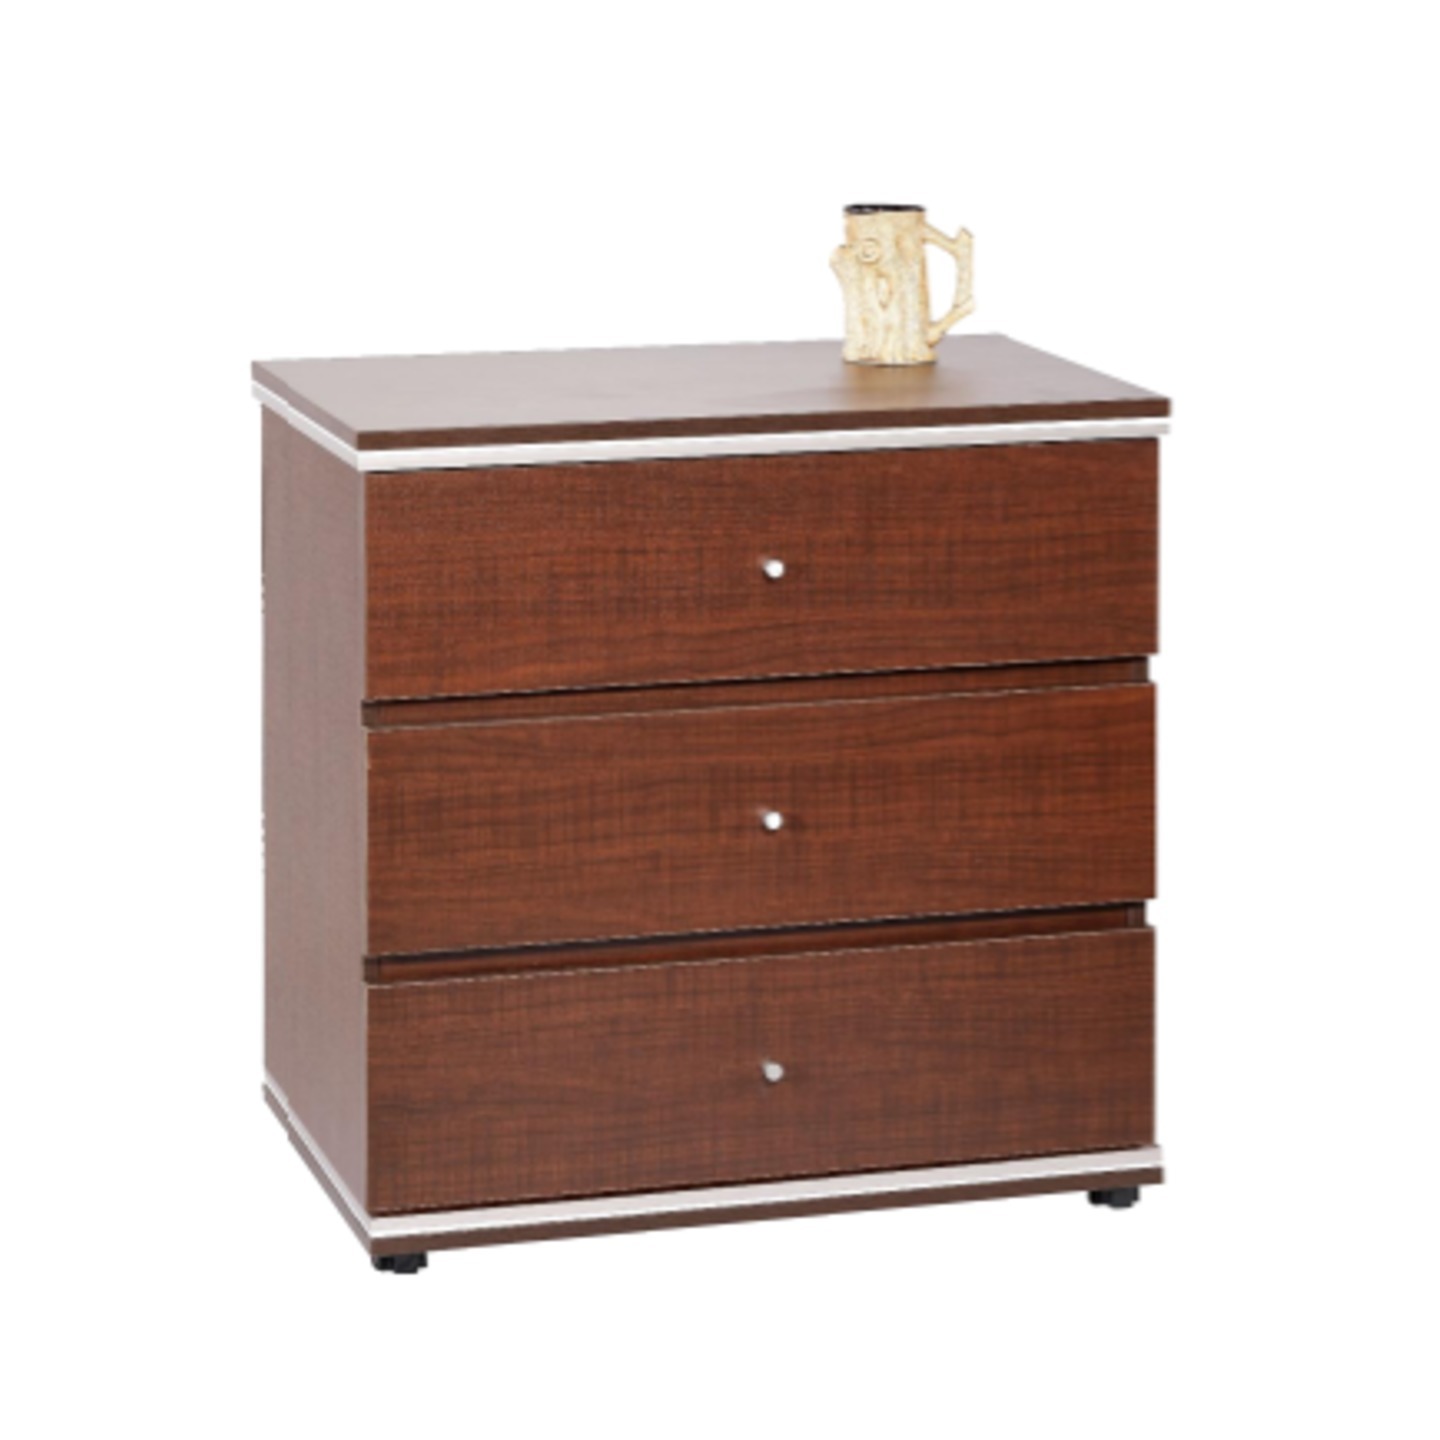 RD Multi Utility Cabinets RD-651 In Brown Colour